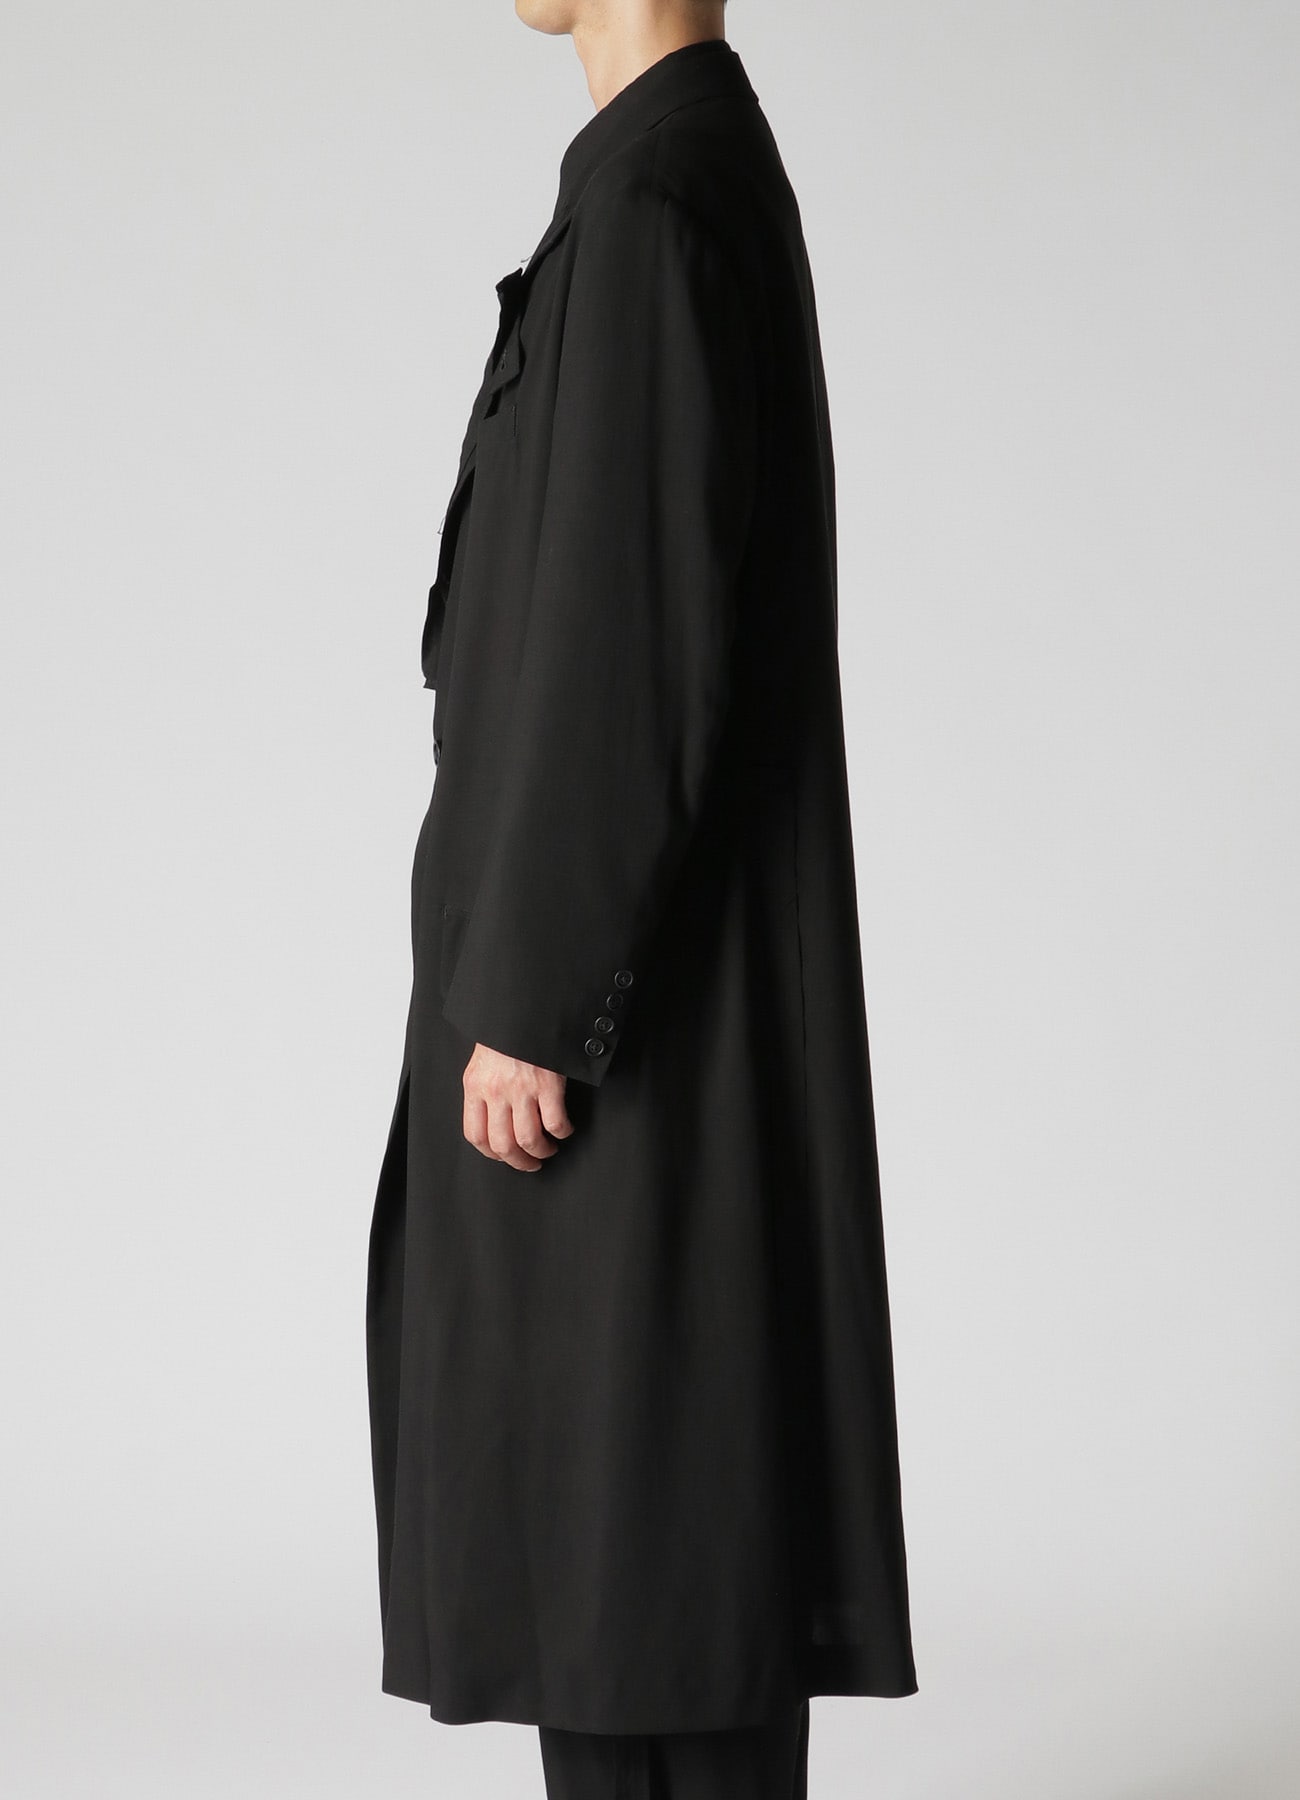 RAYON CAMBRIC LONG JACKET WITH DECORATIVE CLOTH